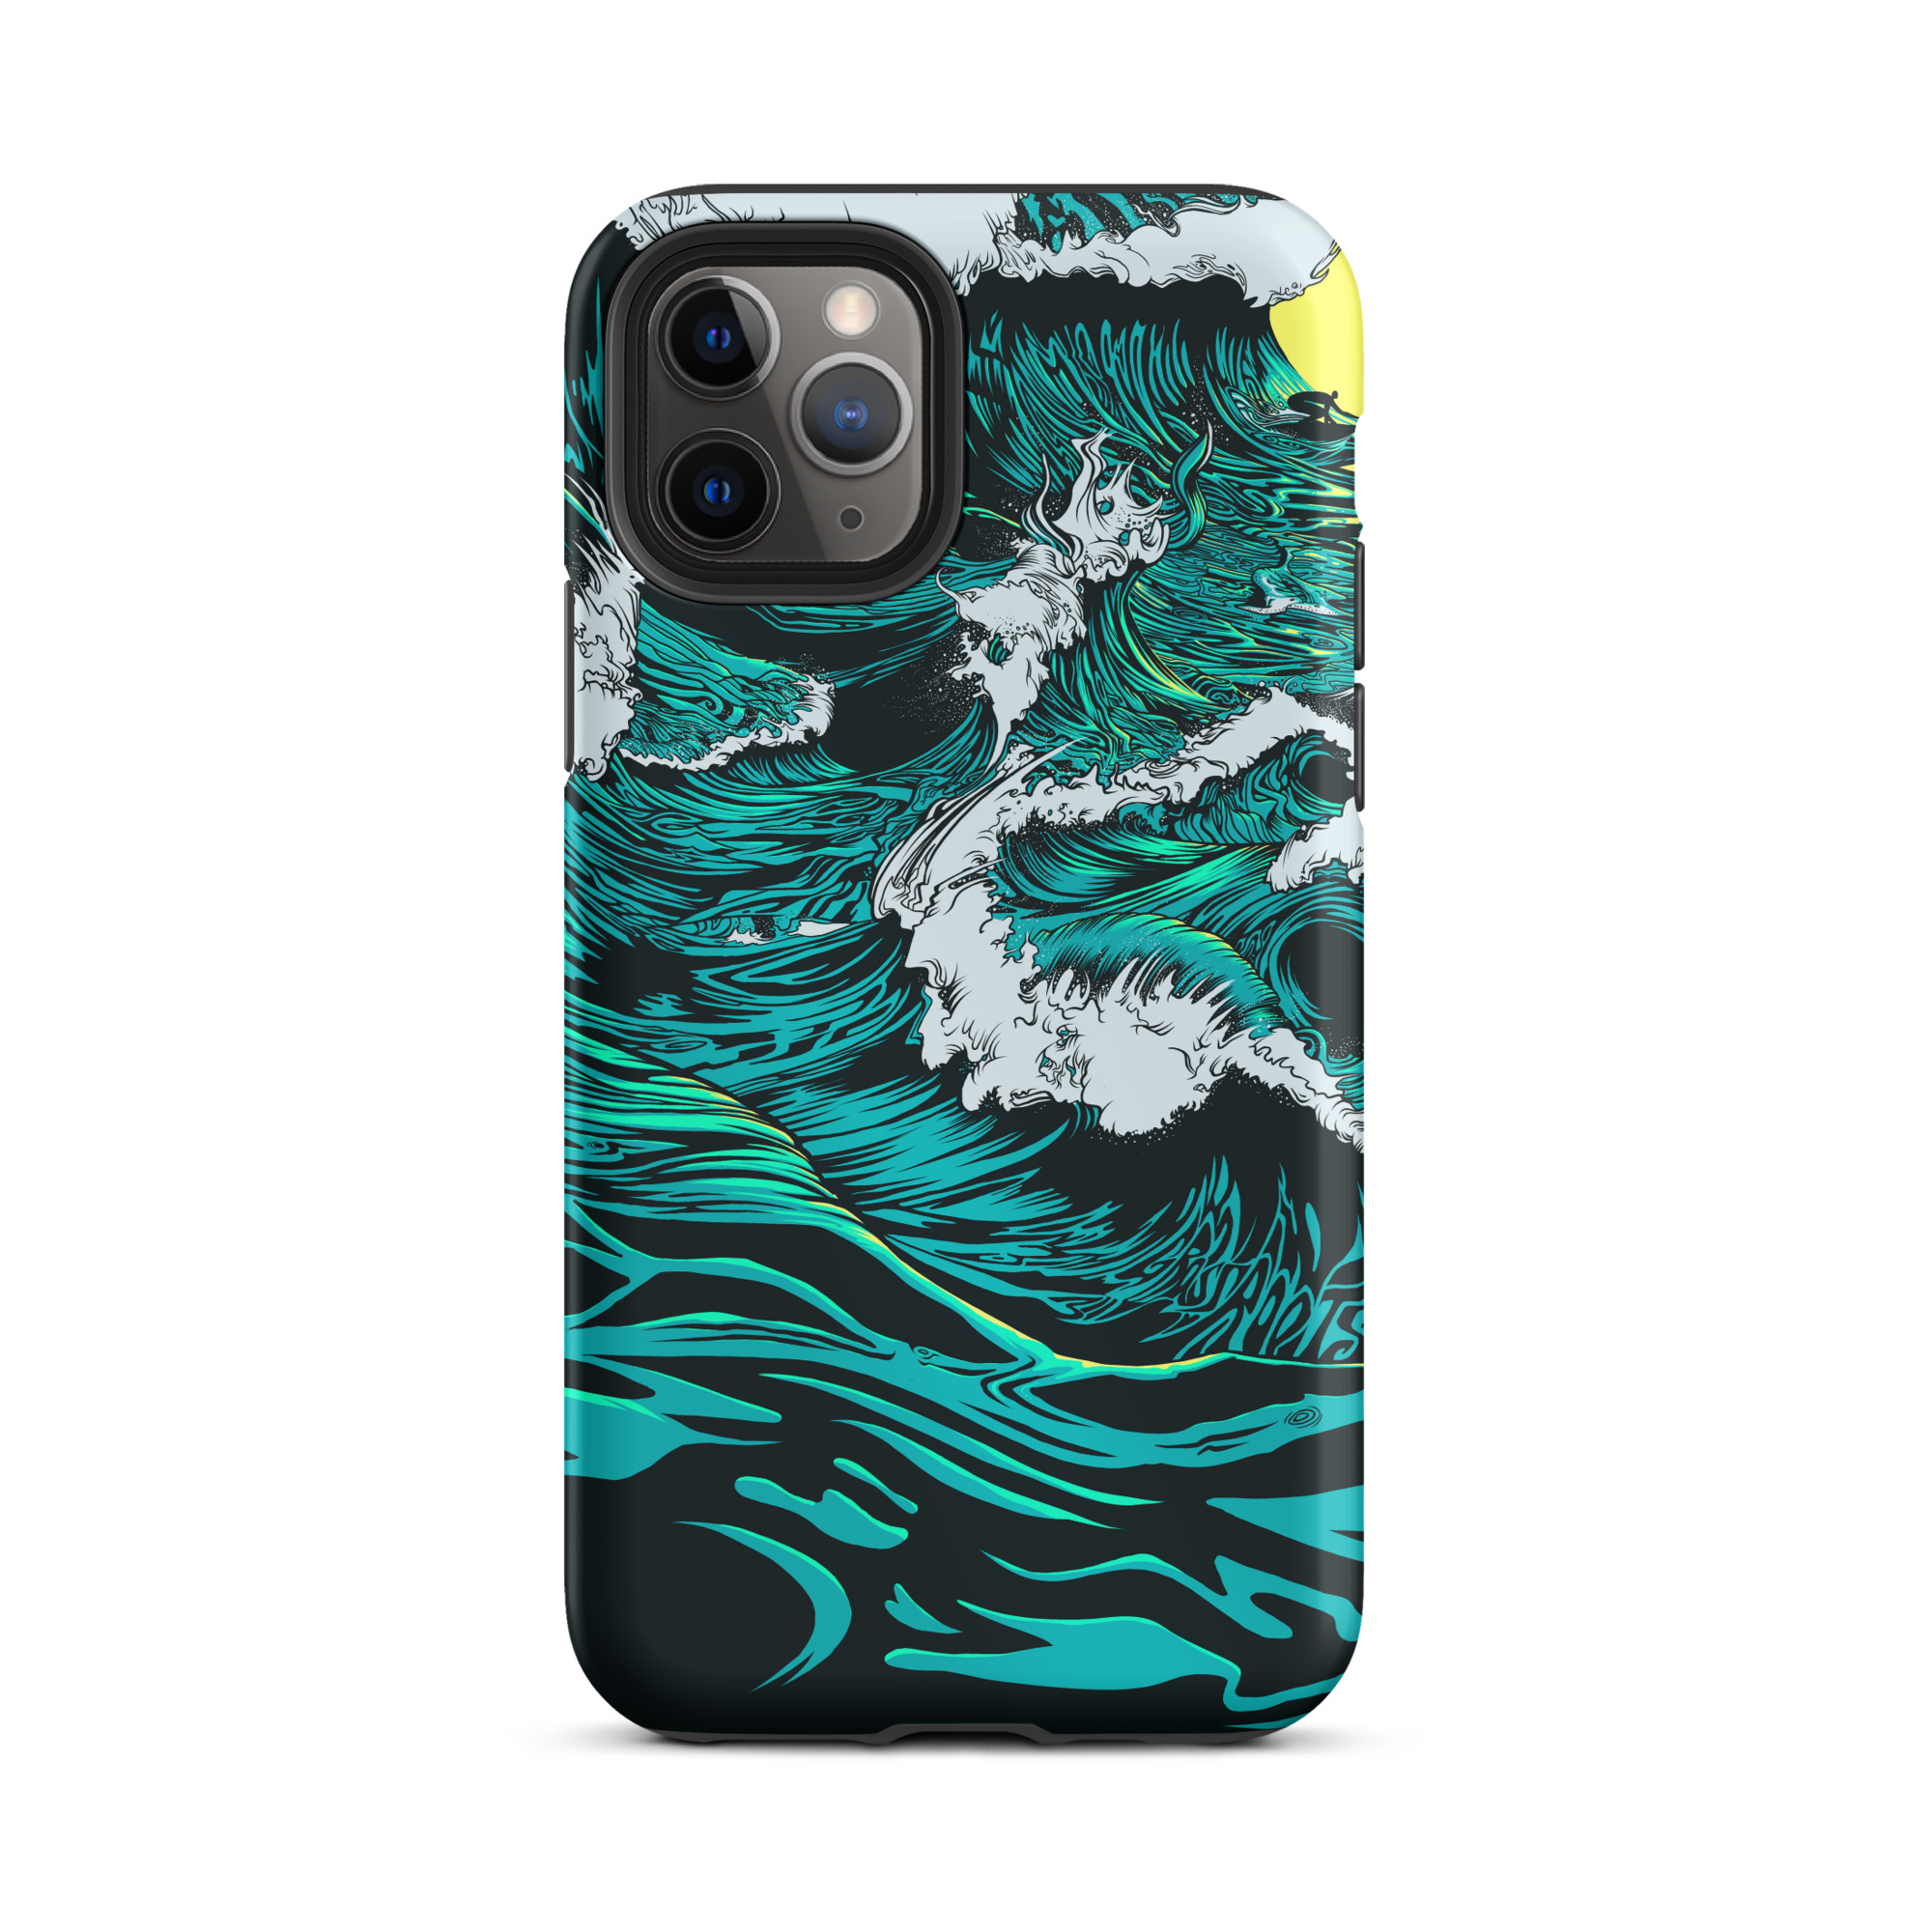 iphone surf art case by Jay Alders